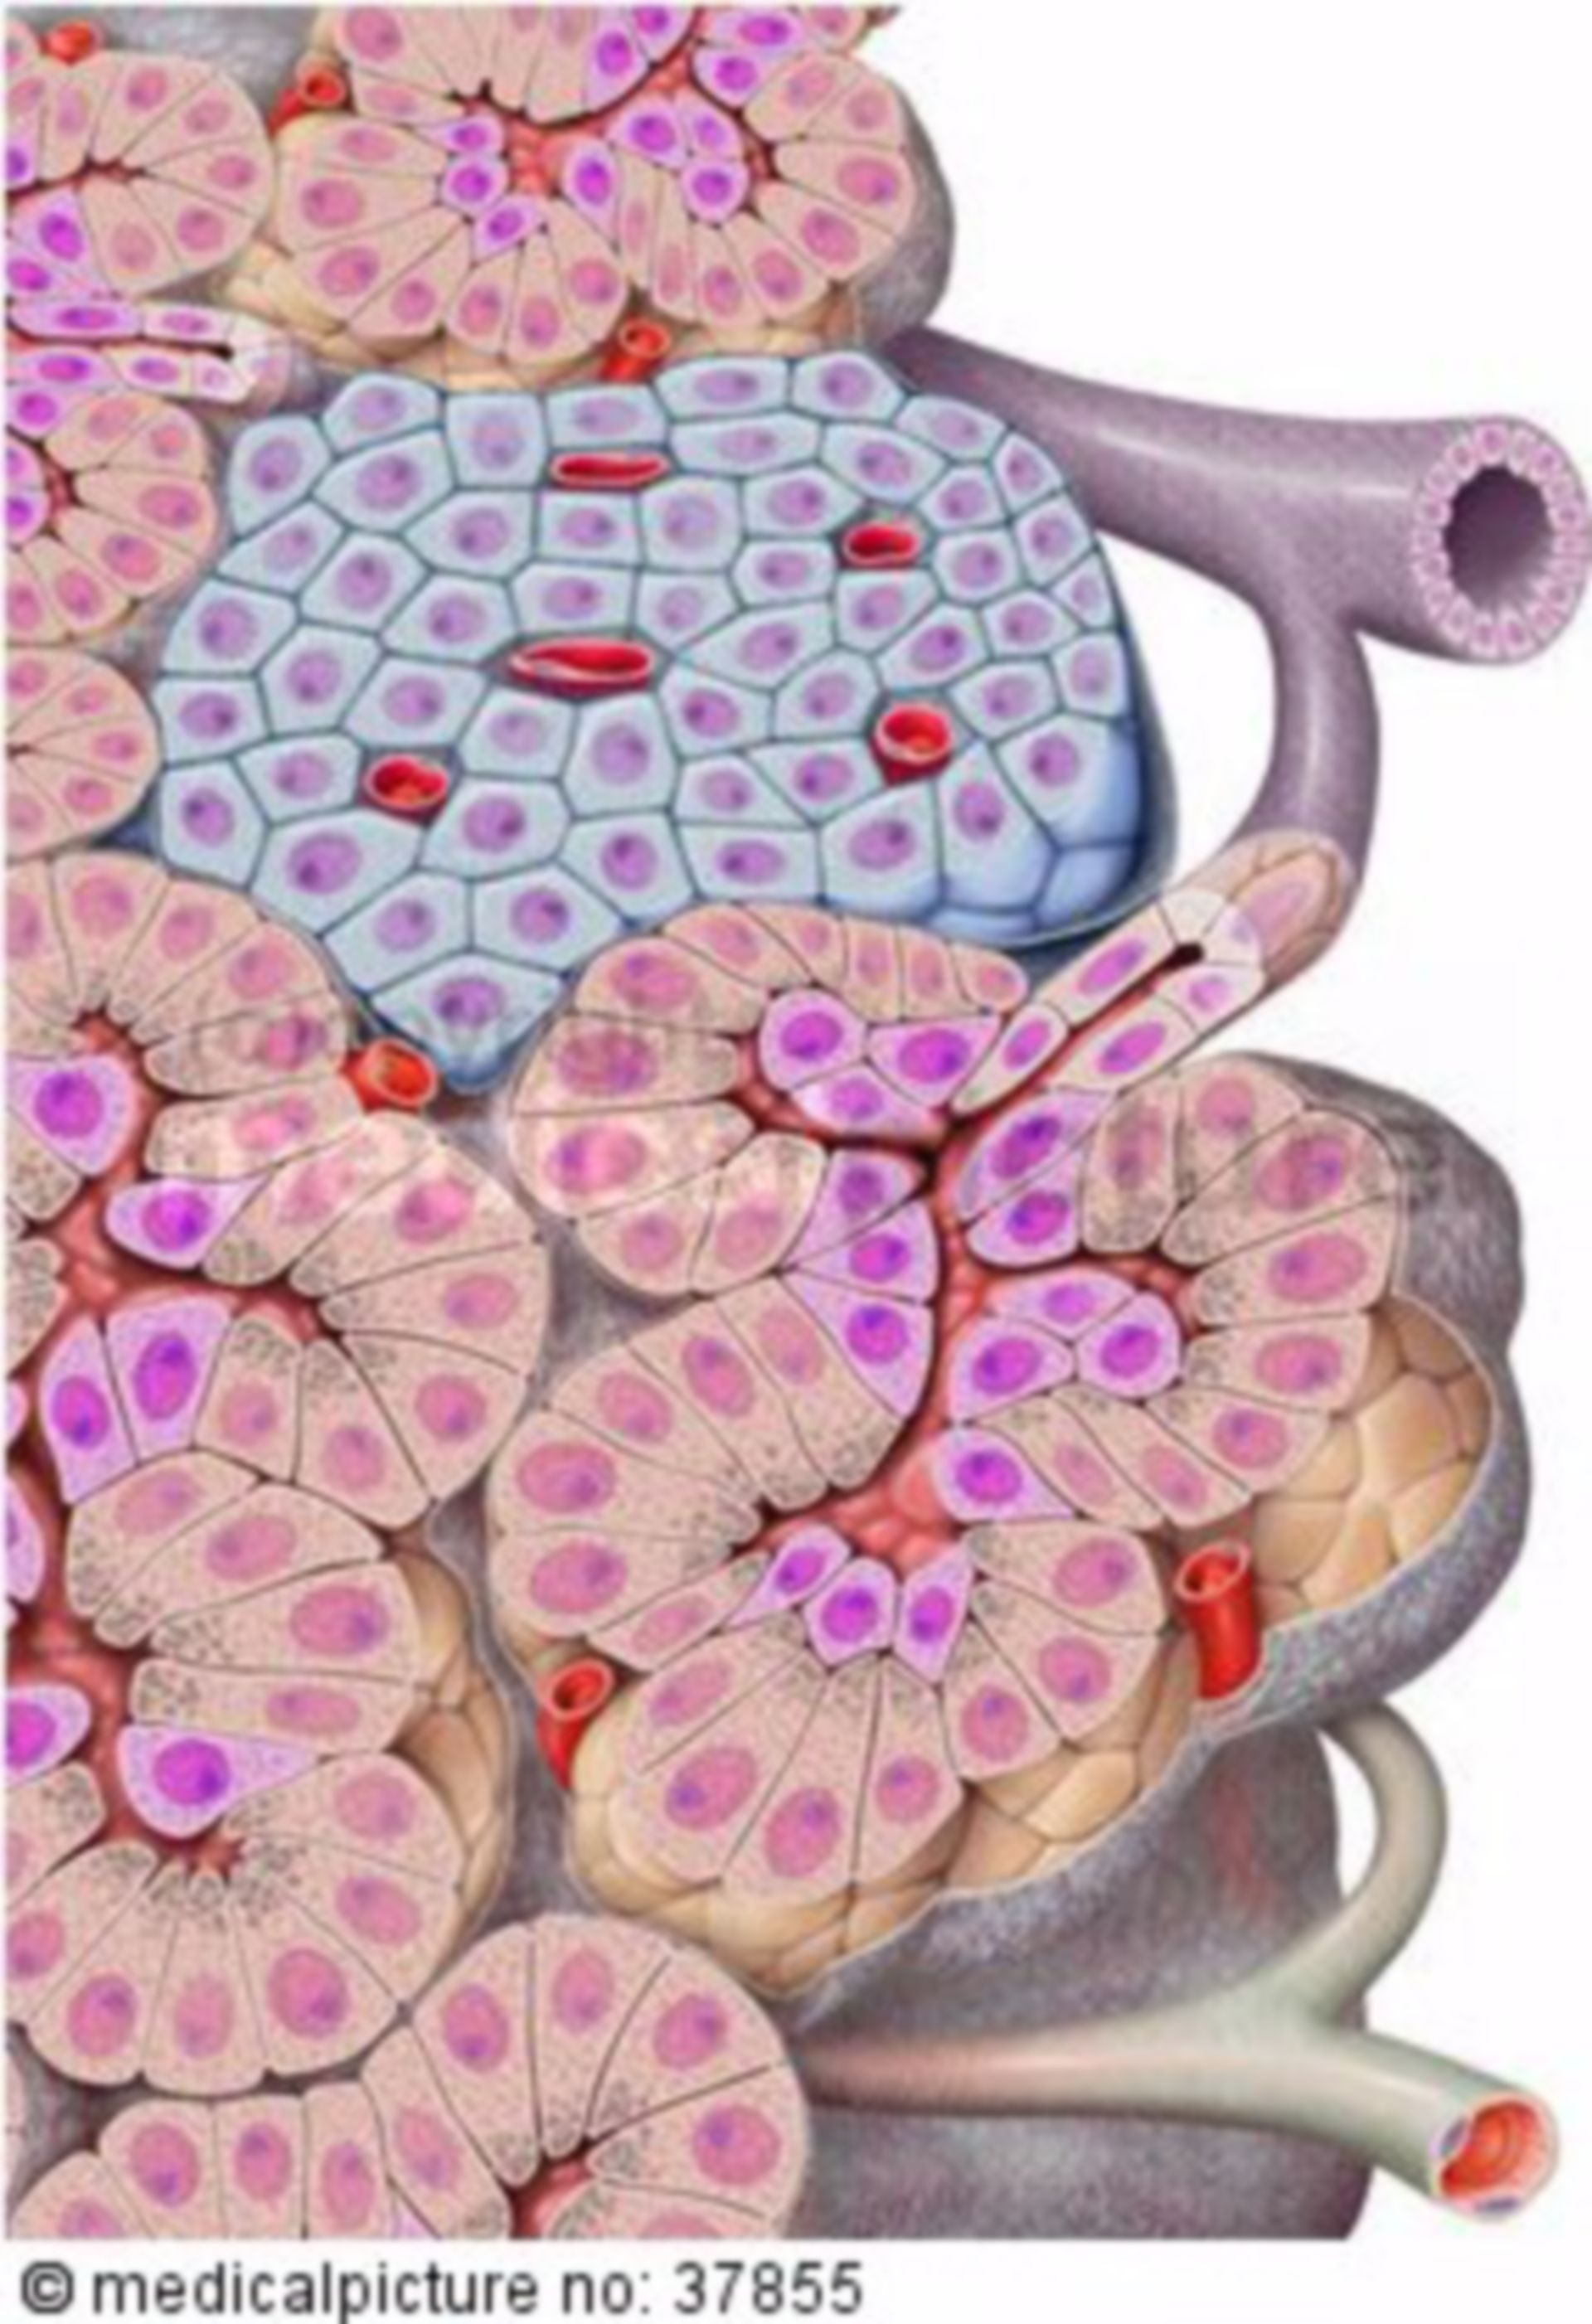 Exocrine and endocrine parts of the pancreas